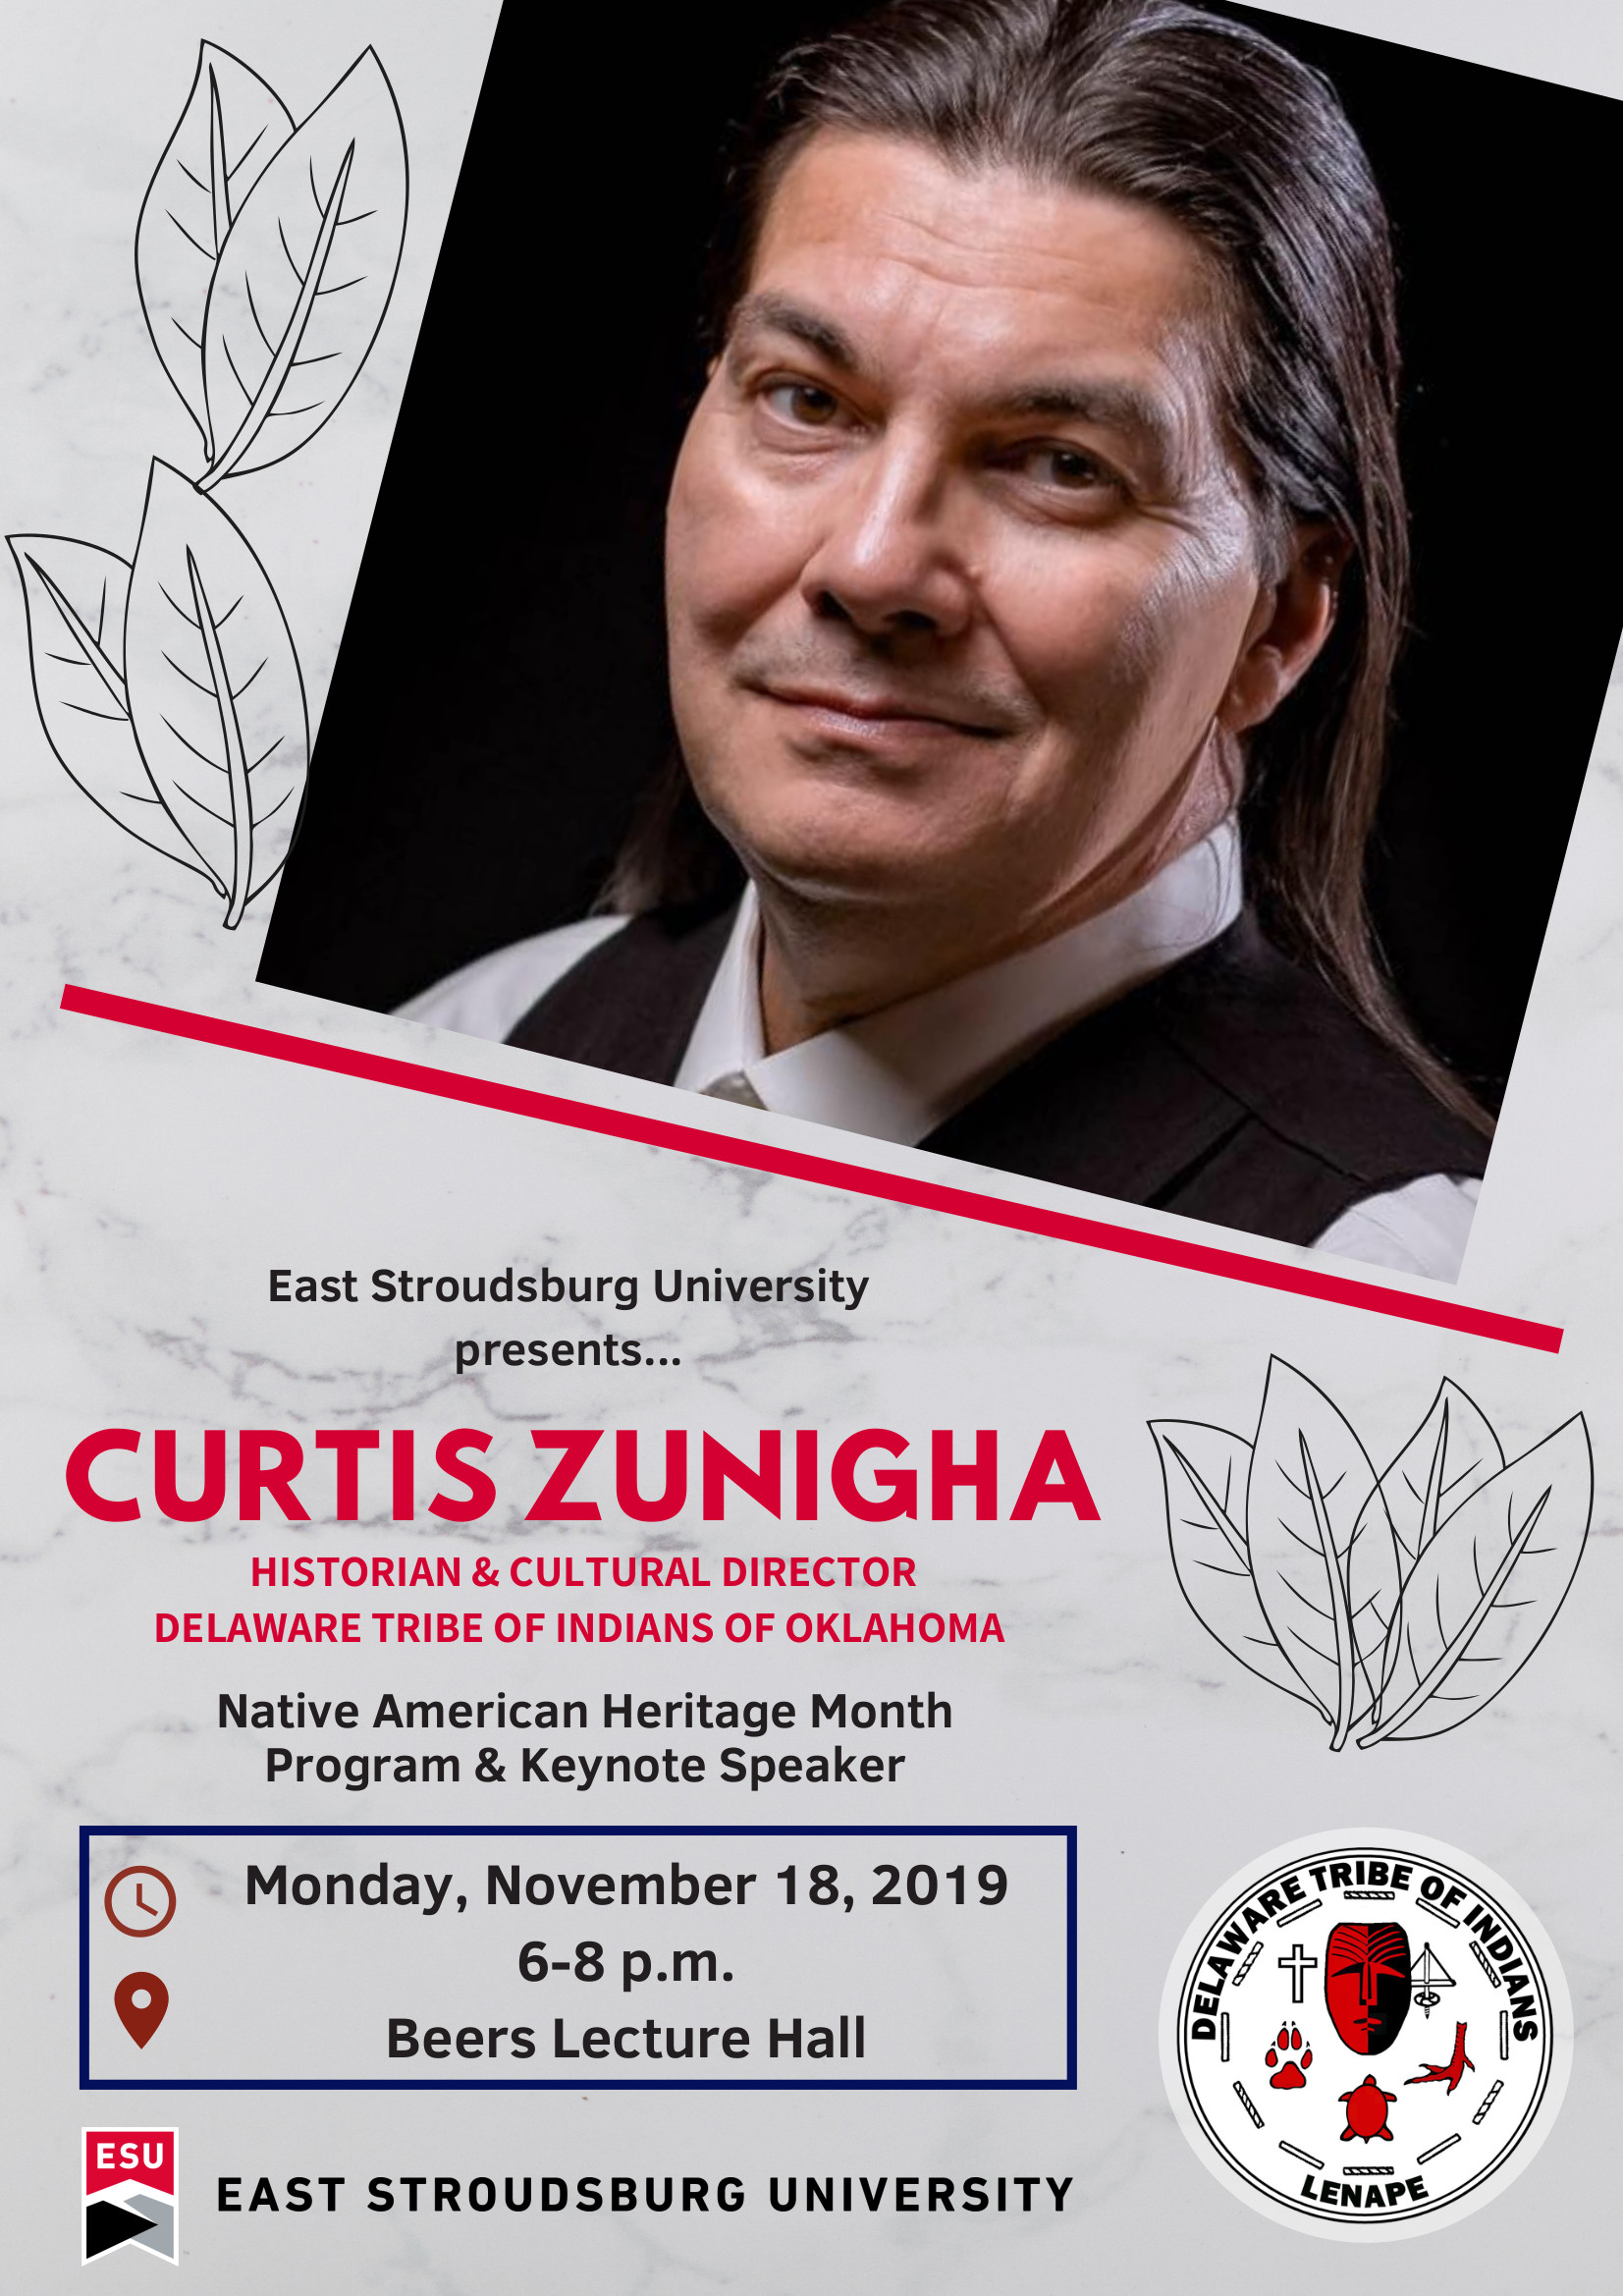 Curtis Zunigha to Give Presentation at East Stroudsburg University